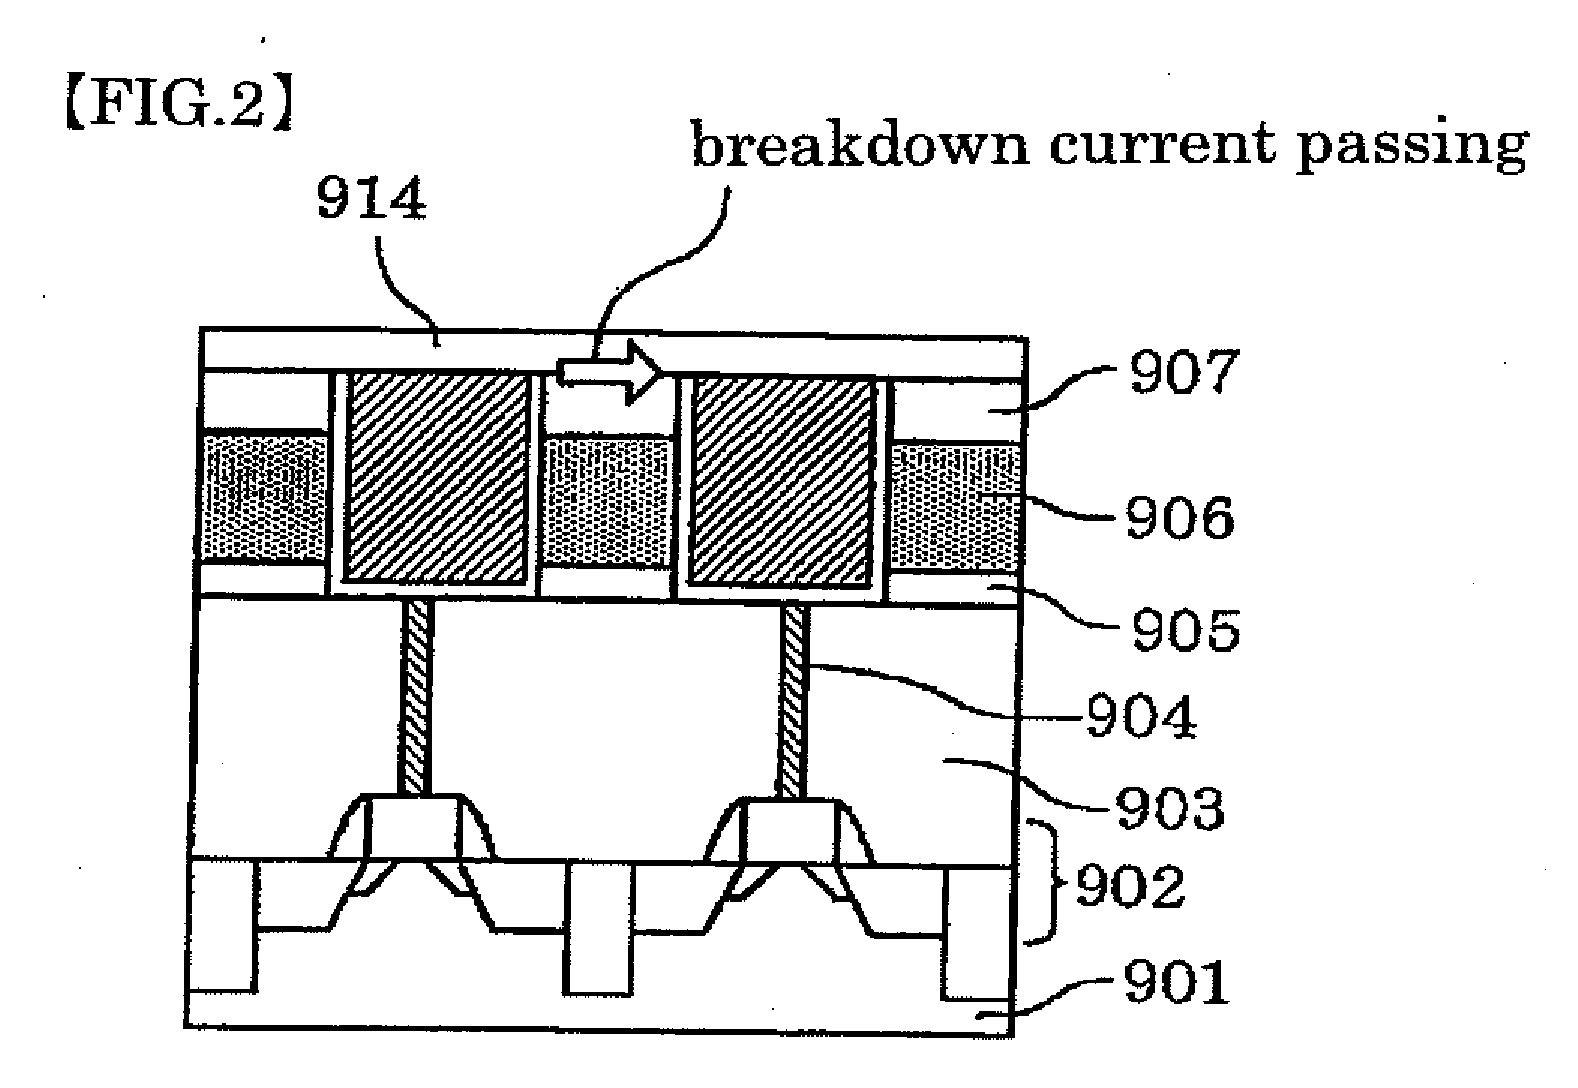 Multilayered wiring structure, and method for manufacturing multilayered wiring